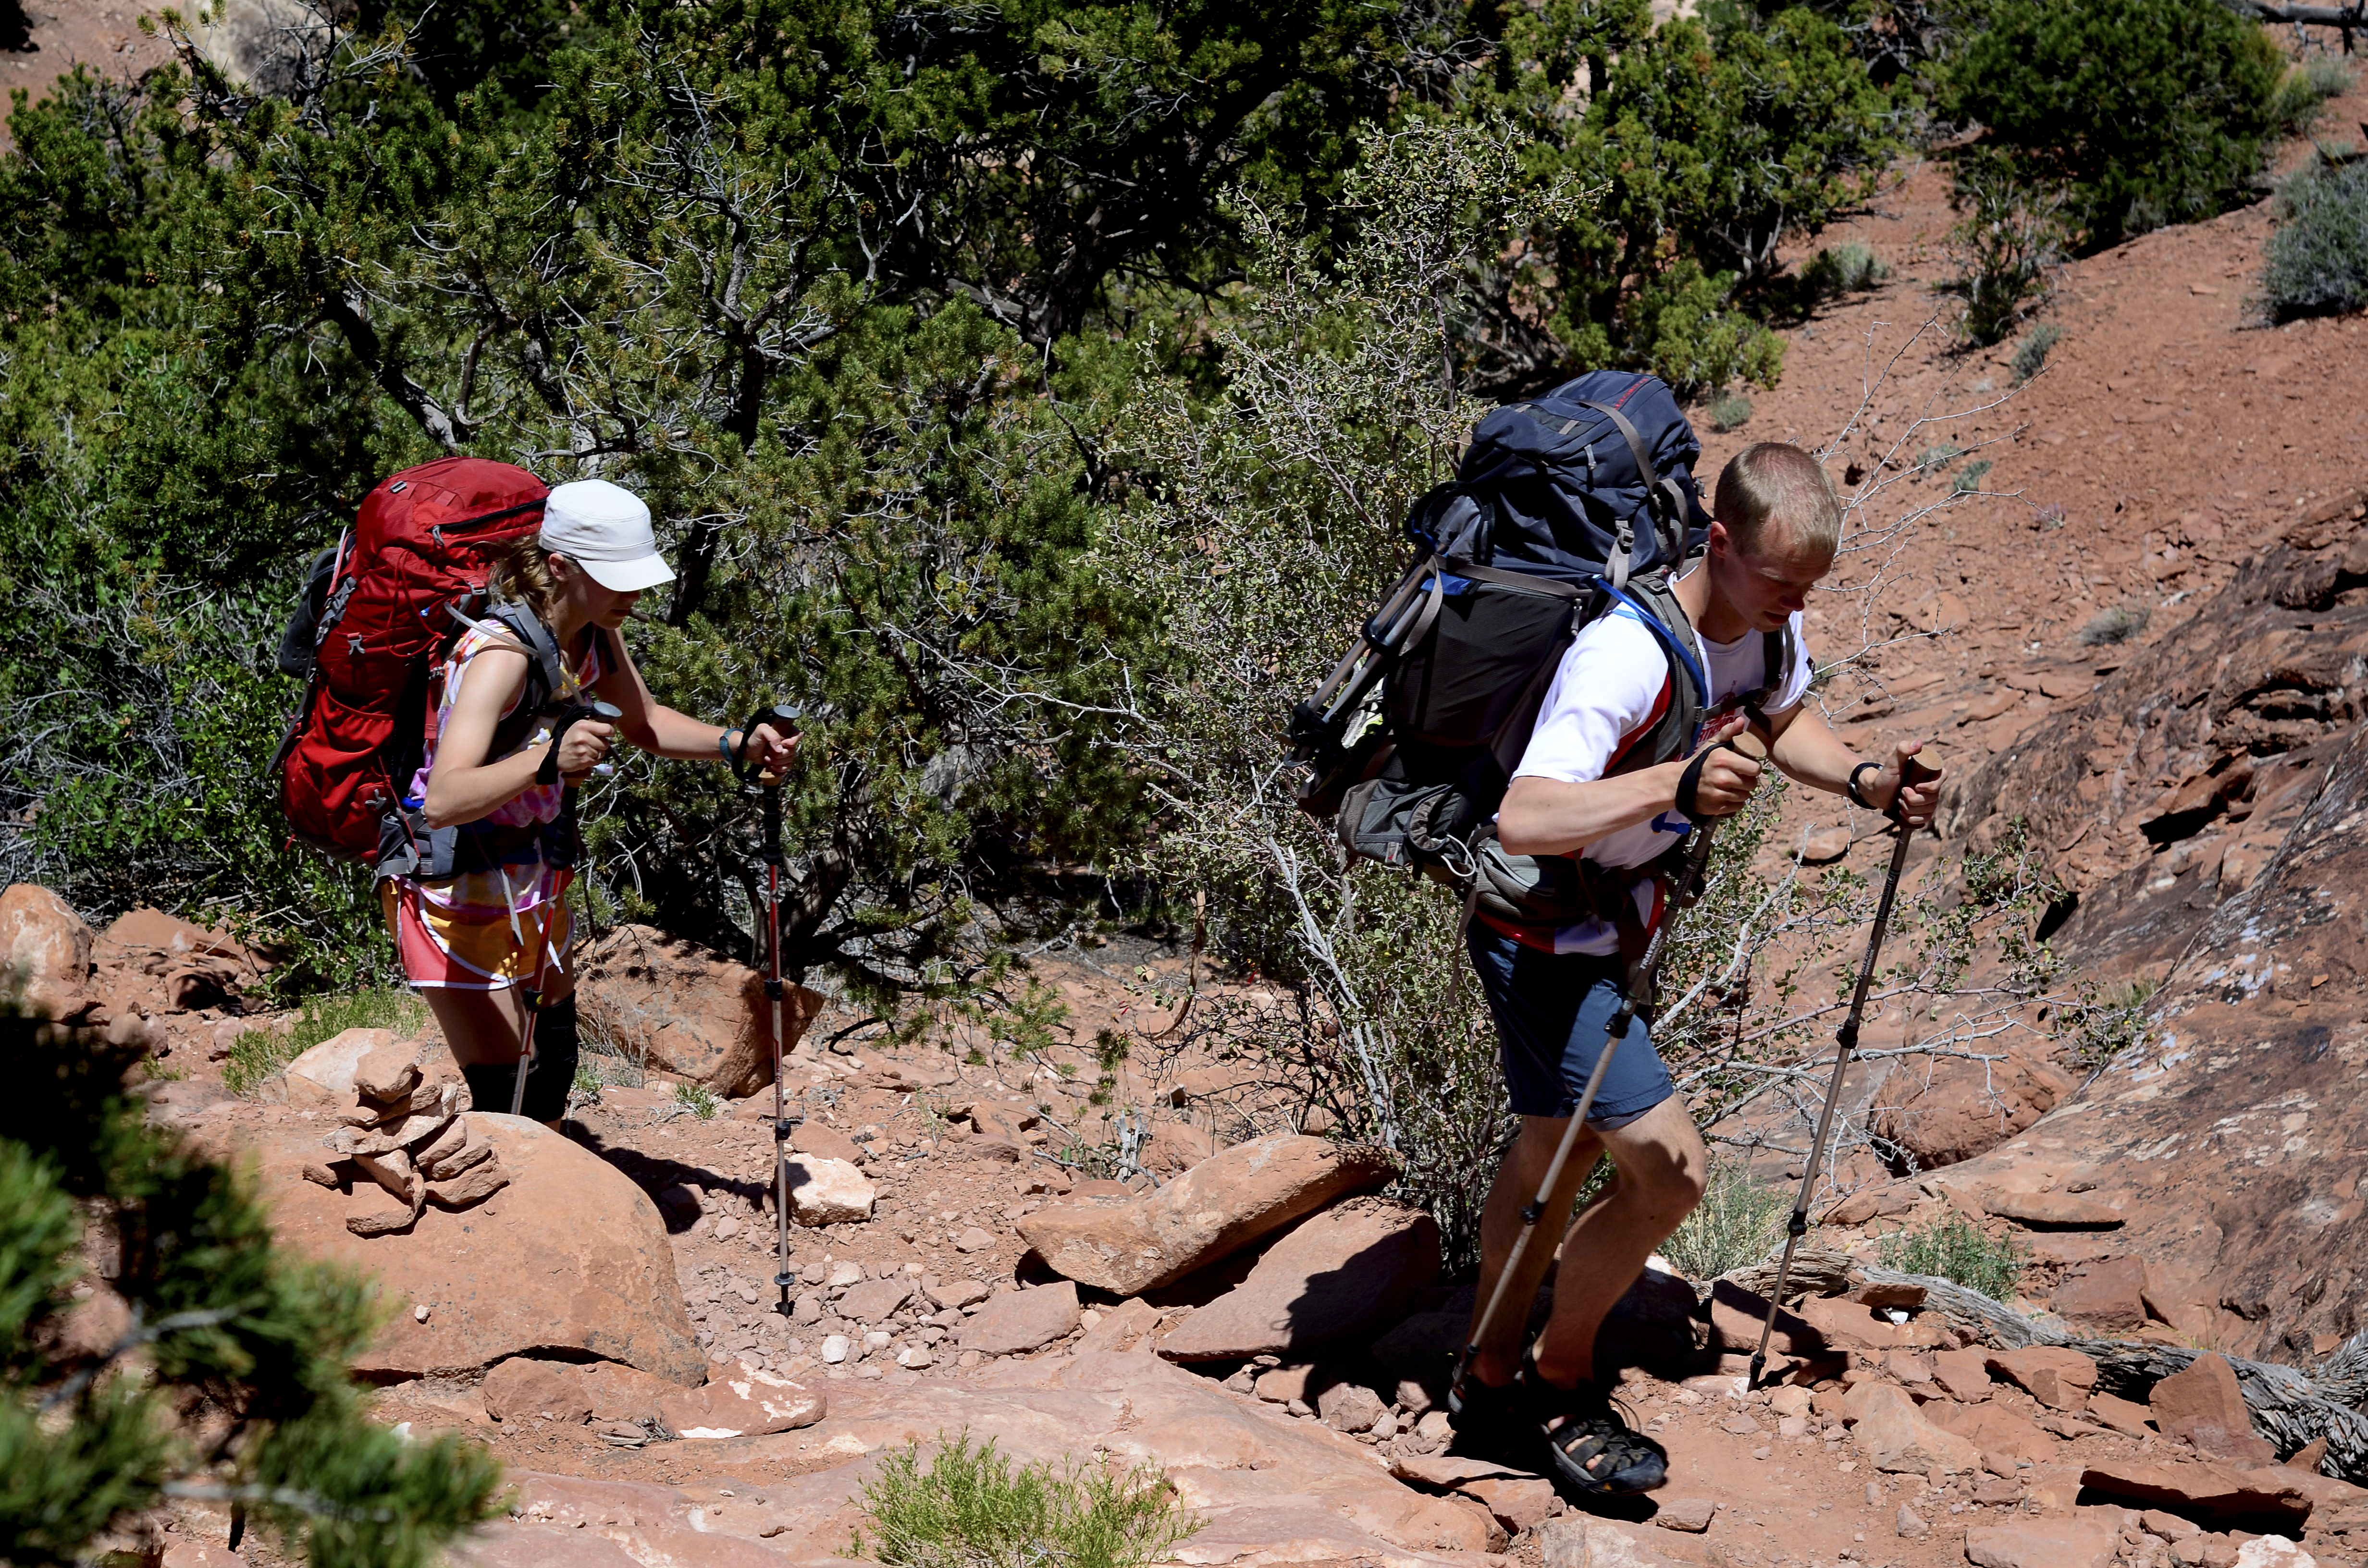 Two hikers wearing summer clothes and large backpacks hike along a desert trail surrounded by pinyon trees.